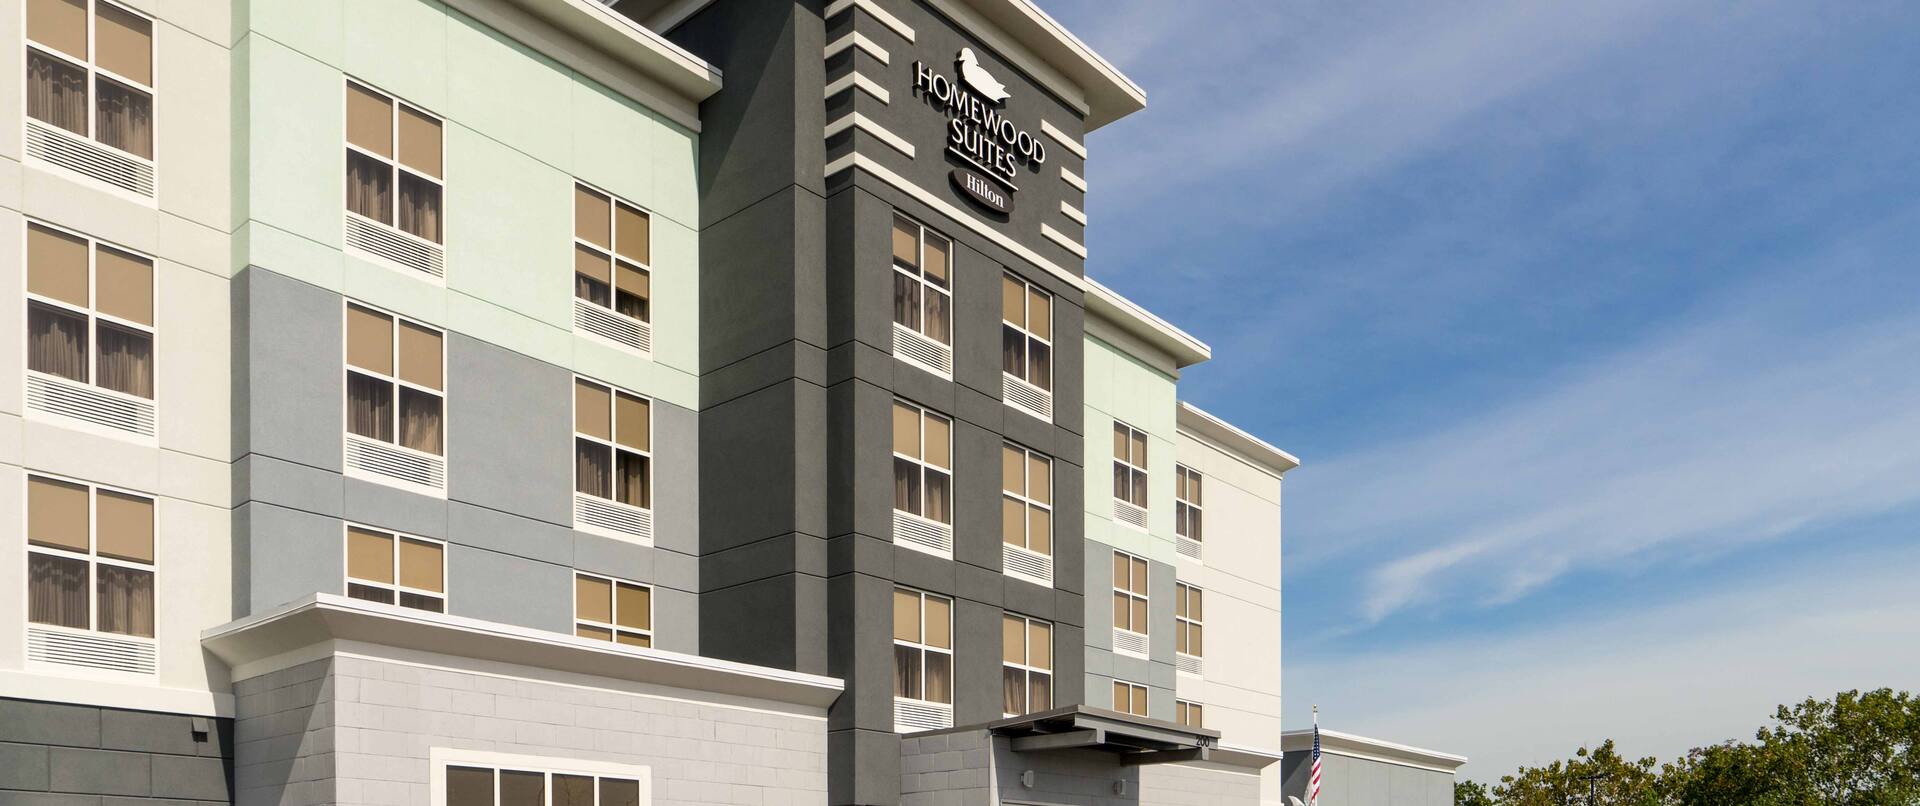 Front Hotel Exterior with signage and circular drive